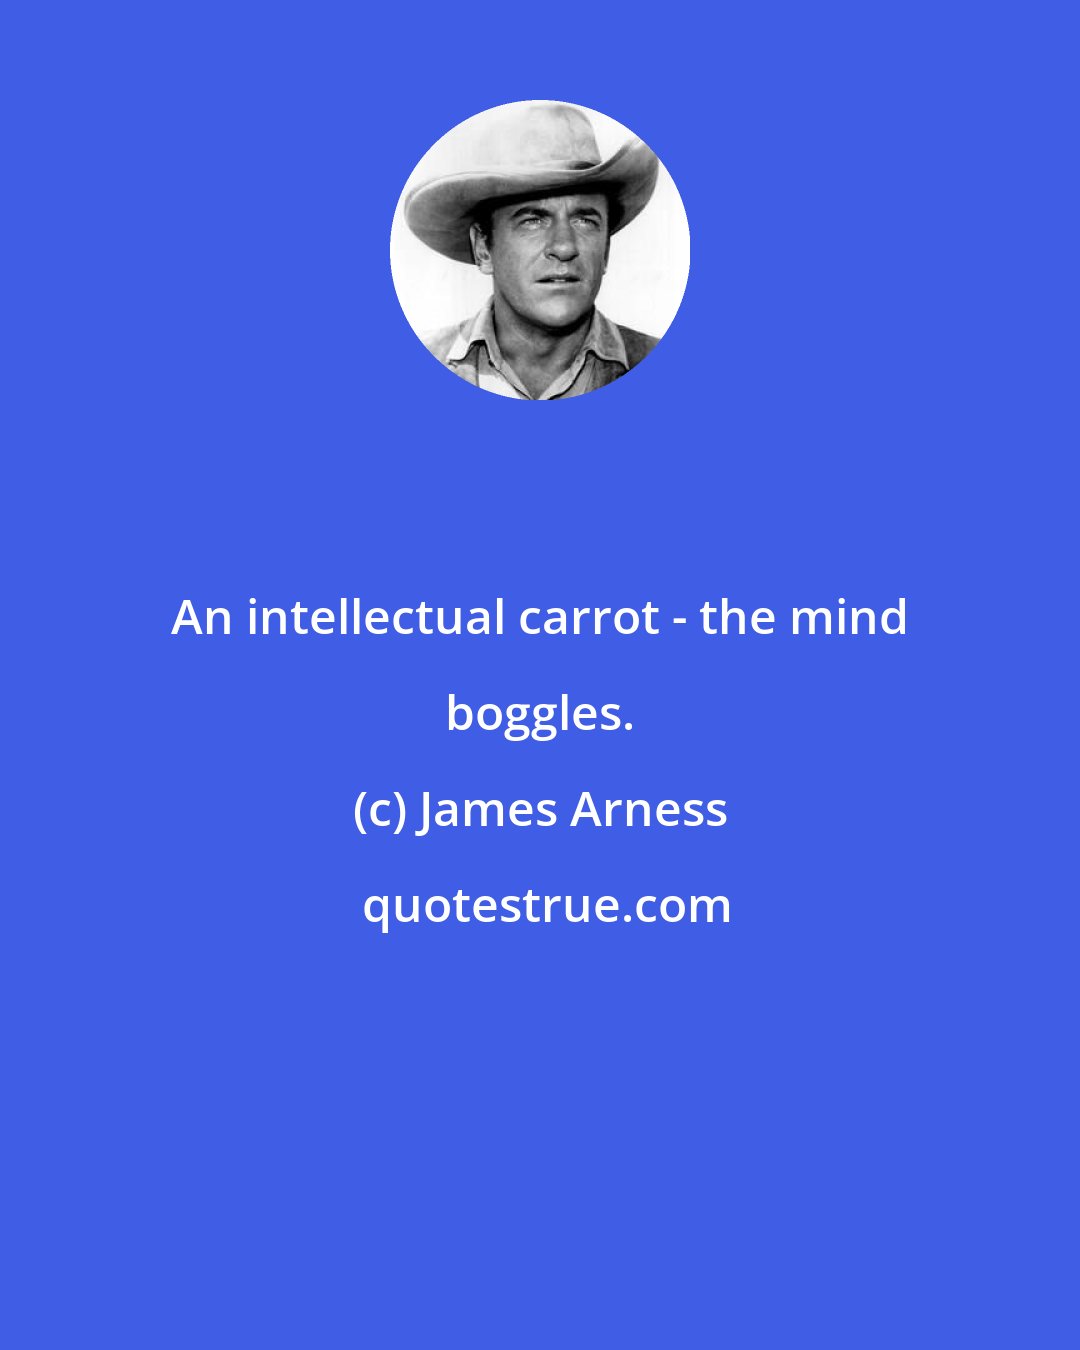 James Arness: An intellectual carrot - the mind boggles.